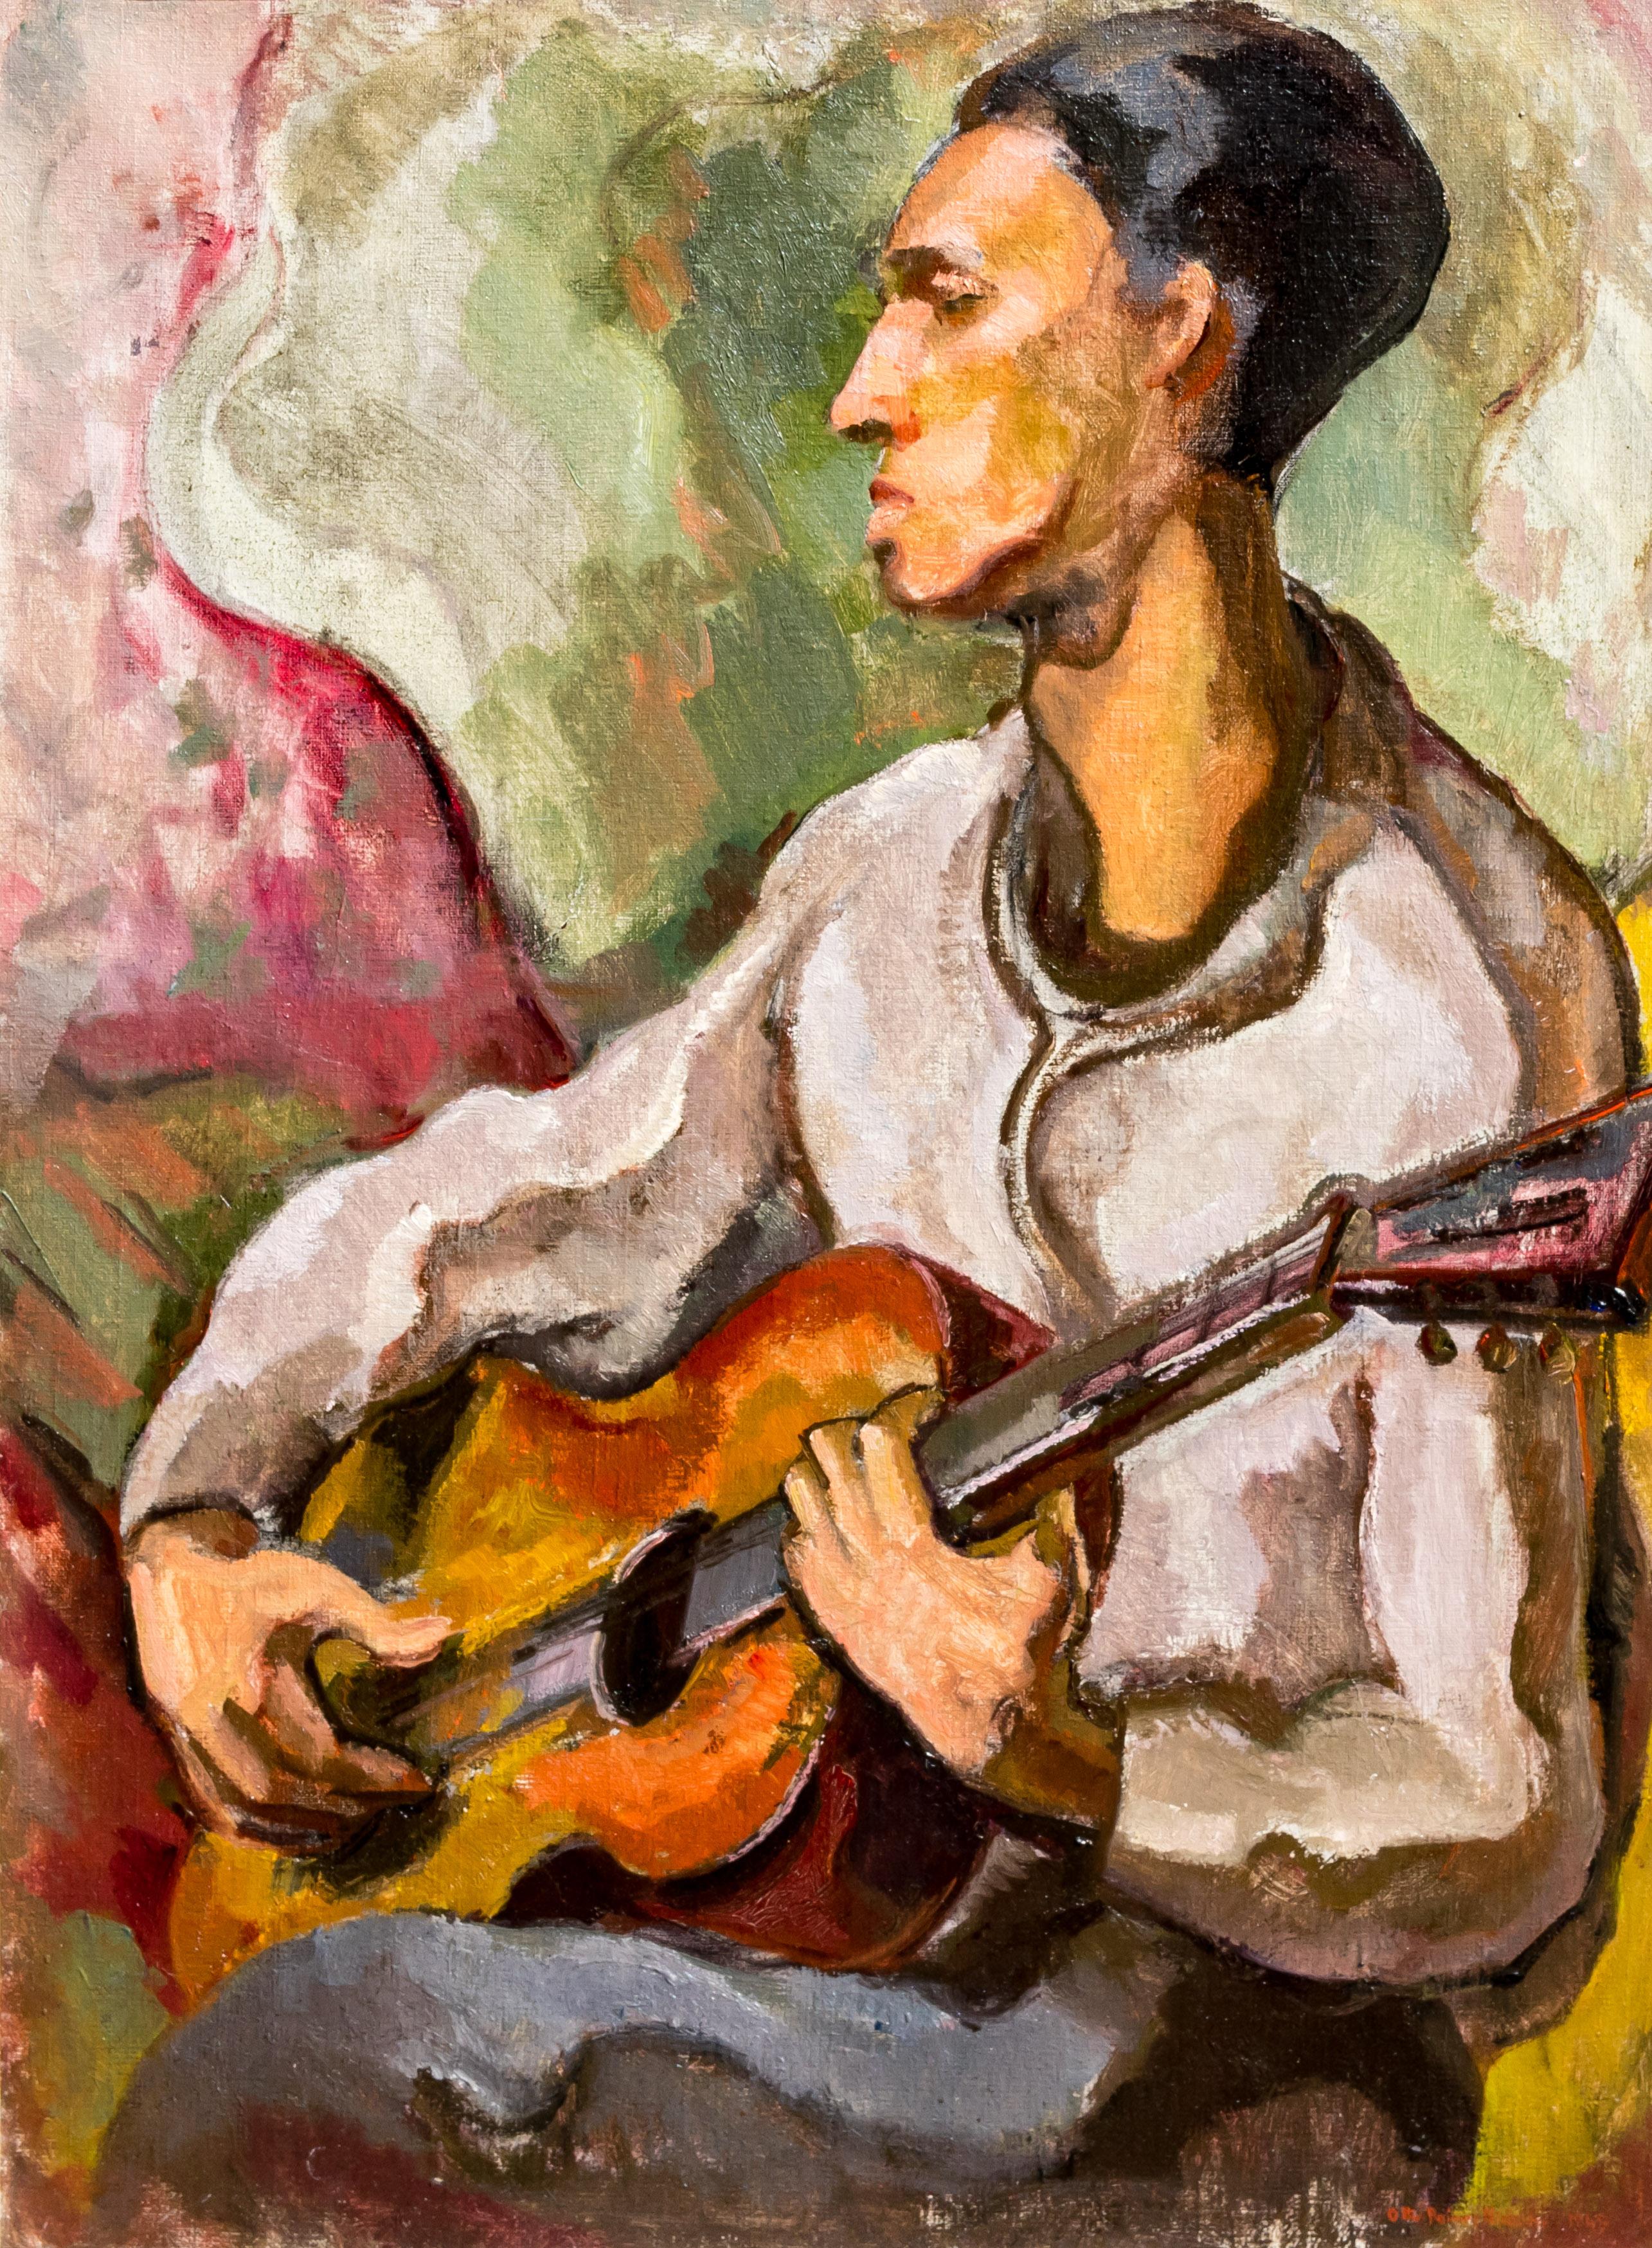 Otto Rainer Niebuhr Figurative Painting - Vintage American Modernist Painting, 1949, Chicago, Otto Niebuhr, "The Guitarist"